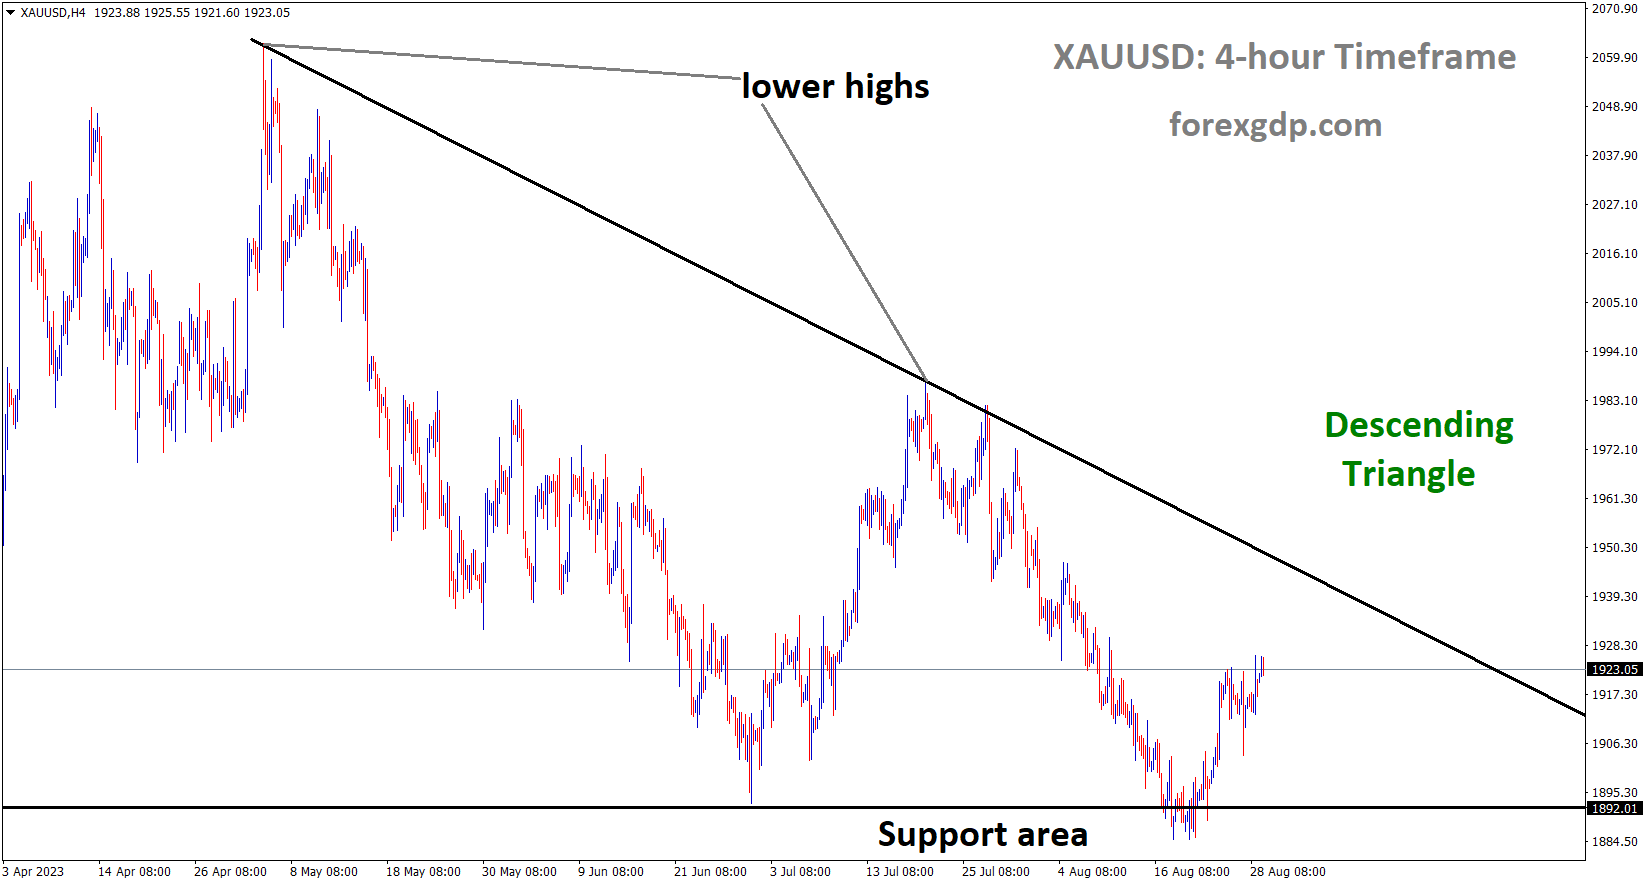 XAUUSD is moving in Descending Triangle and market has rebounded from the support area of the pattern